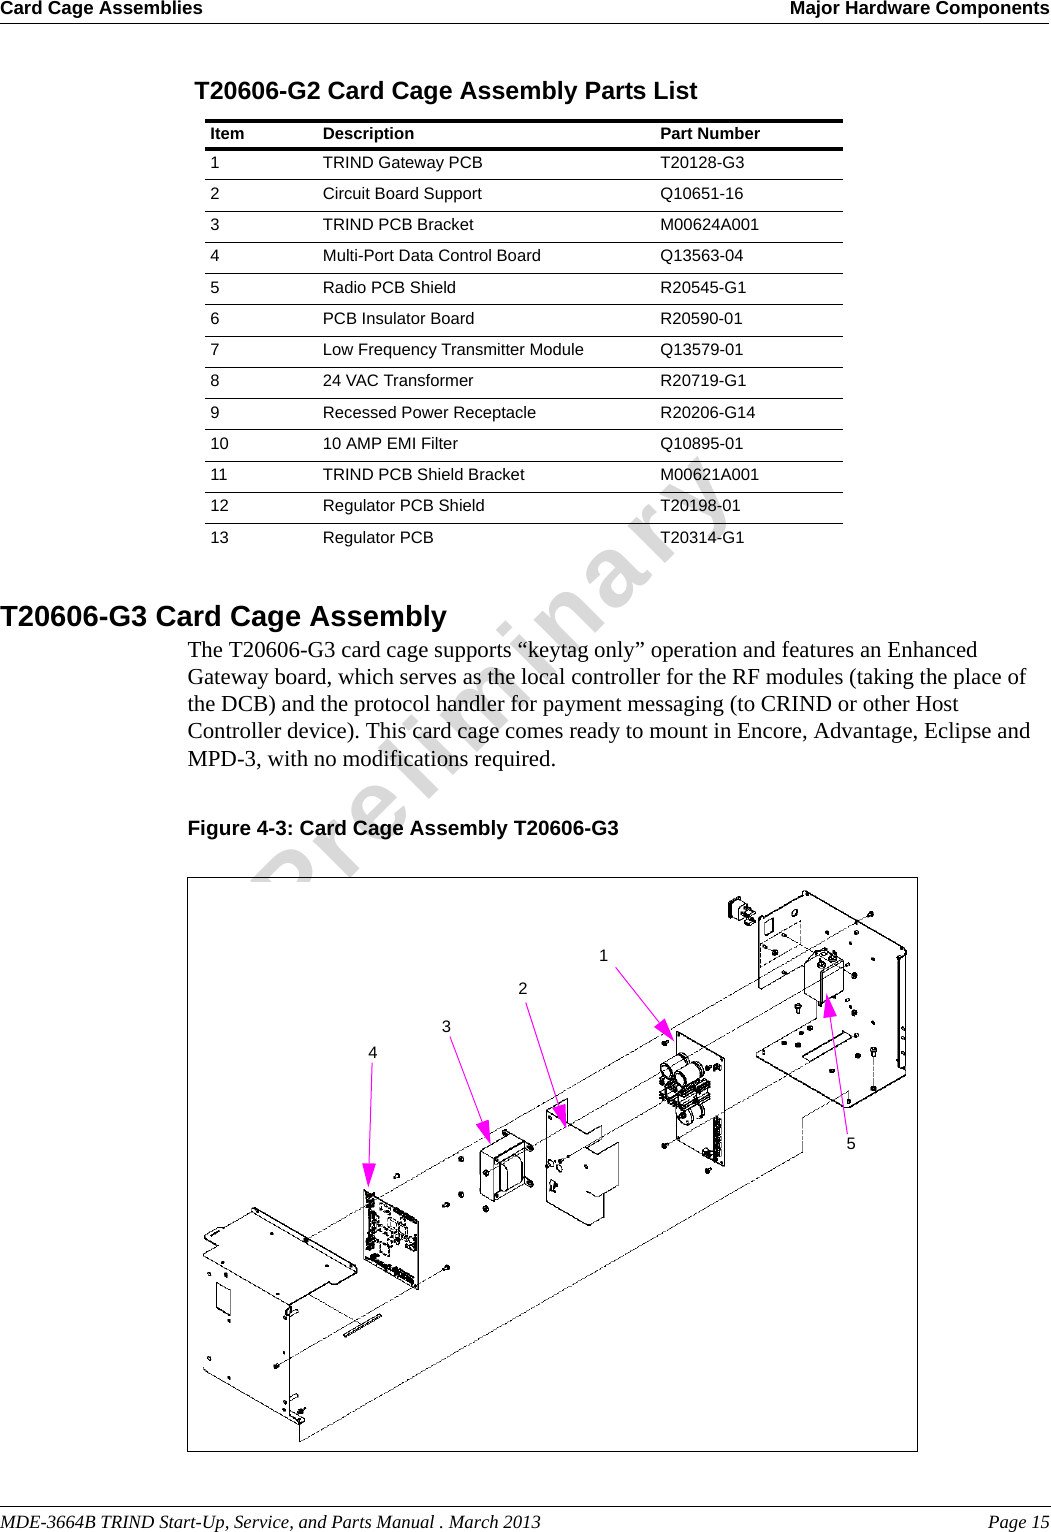 MDE-3664B TRIND Start-Up, Service, and Parts Manual . March 2013 Page 15Card Cage Assemblies Major Hardware ComponentsPreliminary T20606-G2 Card Cage Assembly Parts List Item Description Part Number1TRIND Gateway PCB T20128-G32Circuit Board Support Q10651-163TRIND PCB Bracket M00624A0014Multi-Port Data Control Board Q13563-045Radio PCB Shield R20545-G16PCB Insulator Board R20590-017Low Frequency Transmitter Module Q13579-01824 VAC Transformer R20719-G19Recessed Power Receptacle R20206-G1410 10 AMP EMI Filter Q10895-0111 TRIND PCB Shield Bracket M00621A00112 Regulator PCB Shield T20198-0113 Regulator PCB T20314-G1T20606-G3 Card Cage AssemblyThe T20606-G3 card cage supports “keytag only” operation and features an Enhanced Gateway board, which serves as the local controller for the RF modules (taking the place of the DCB) and the protocol handler for payment messaging (to CRIND or other Host Controller device). This card cage comes ready to mount in Encore, Advantage, Eclipse and MPD-3, with no modifications required. Figure 4-3: Card Cage Assembly T20606-G314253